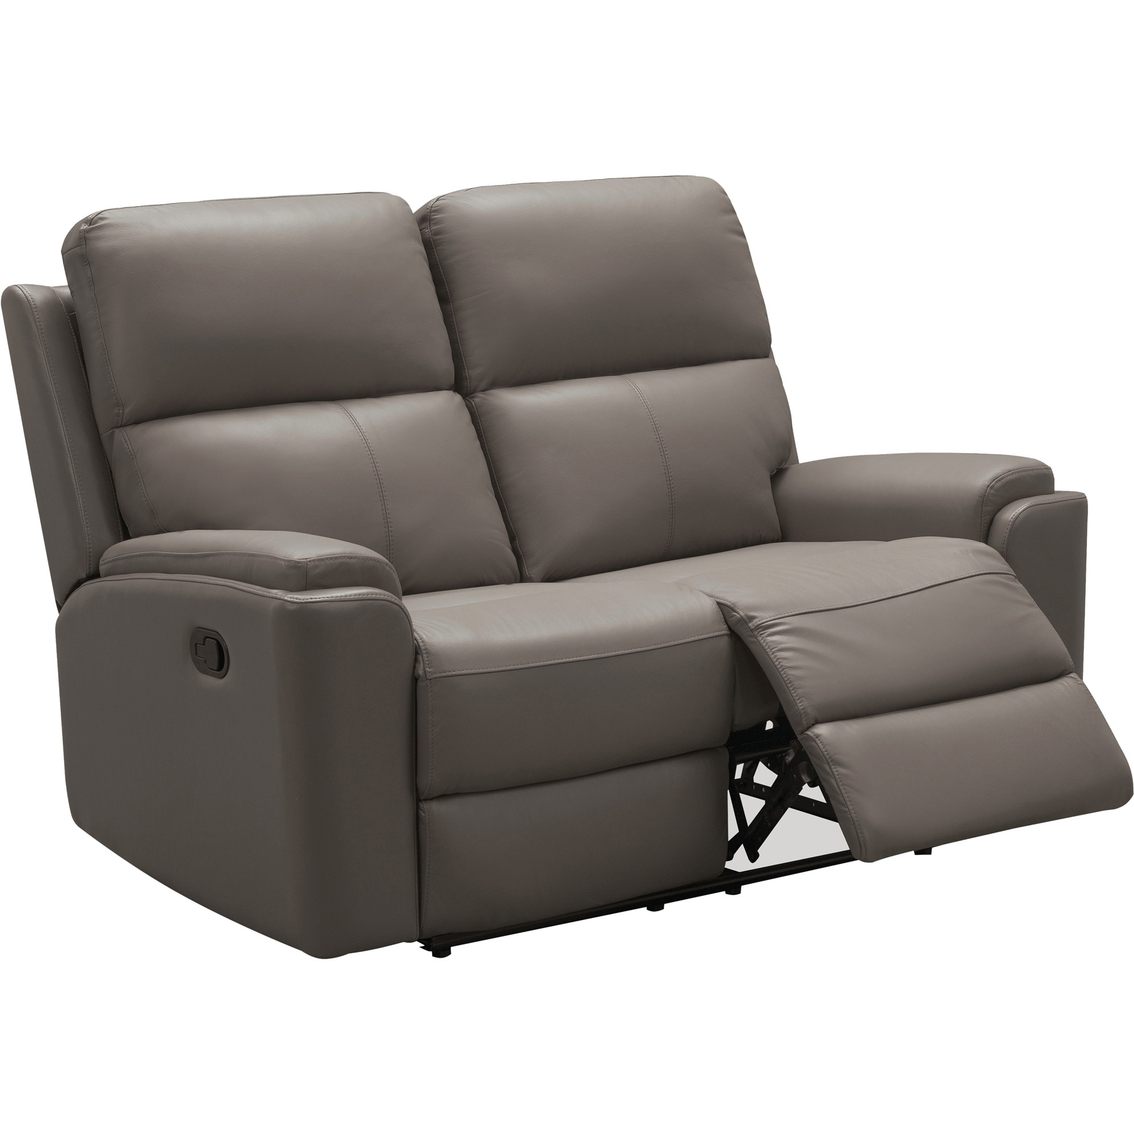 Abbyson Jasper Collection Top Grain Leather Reclining Loveseat - Image 3 of 6